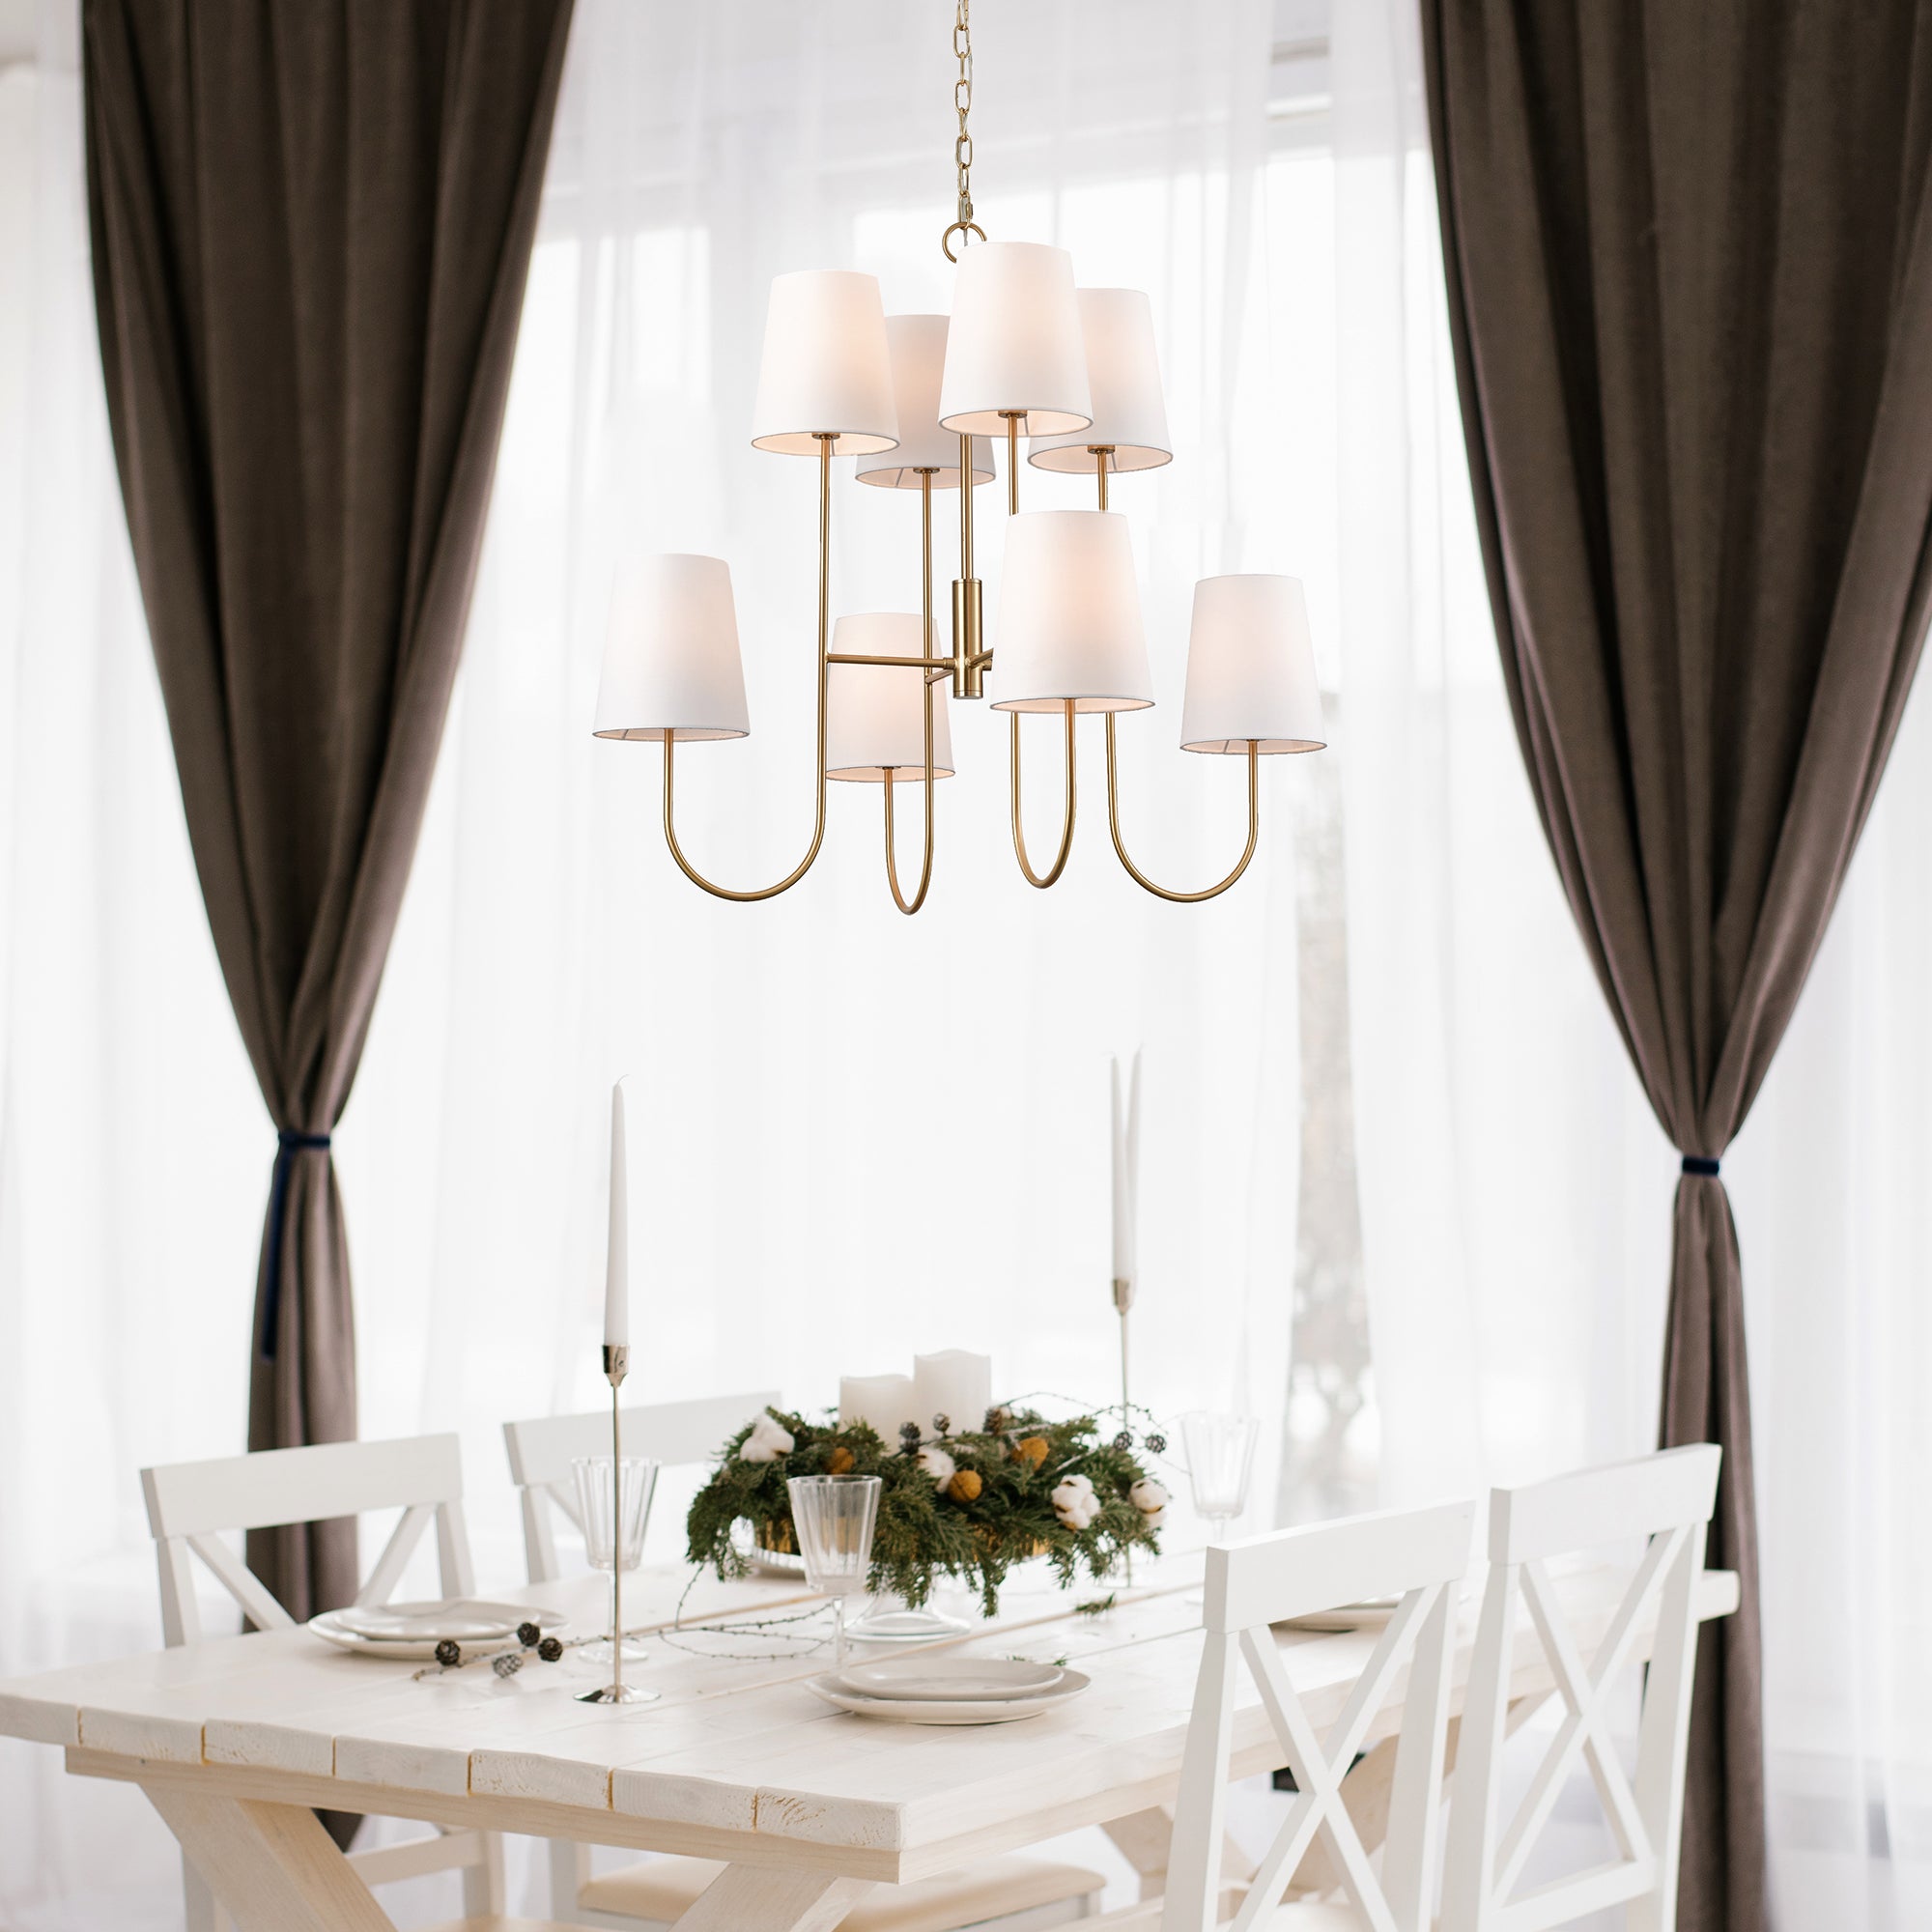 The Kinley Chandelier is a fresh take on a classic two-tiered shape. Subtle modern touches like the tapered shade and gold finish complete the look. Amethyst Home provides interior design, new construction, custom furniture, and area rugs in the Park City metro area.